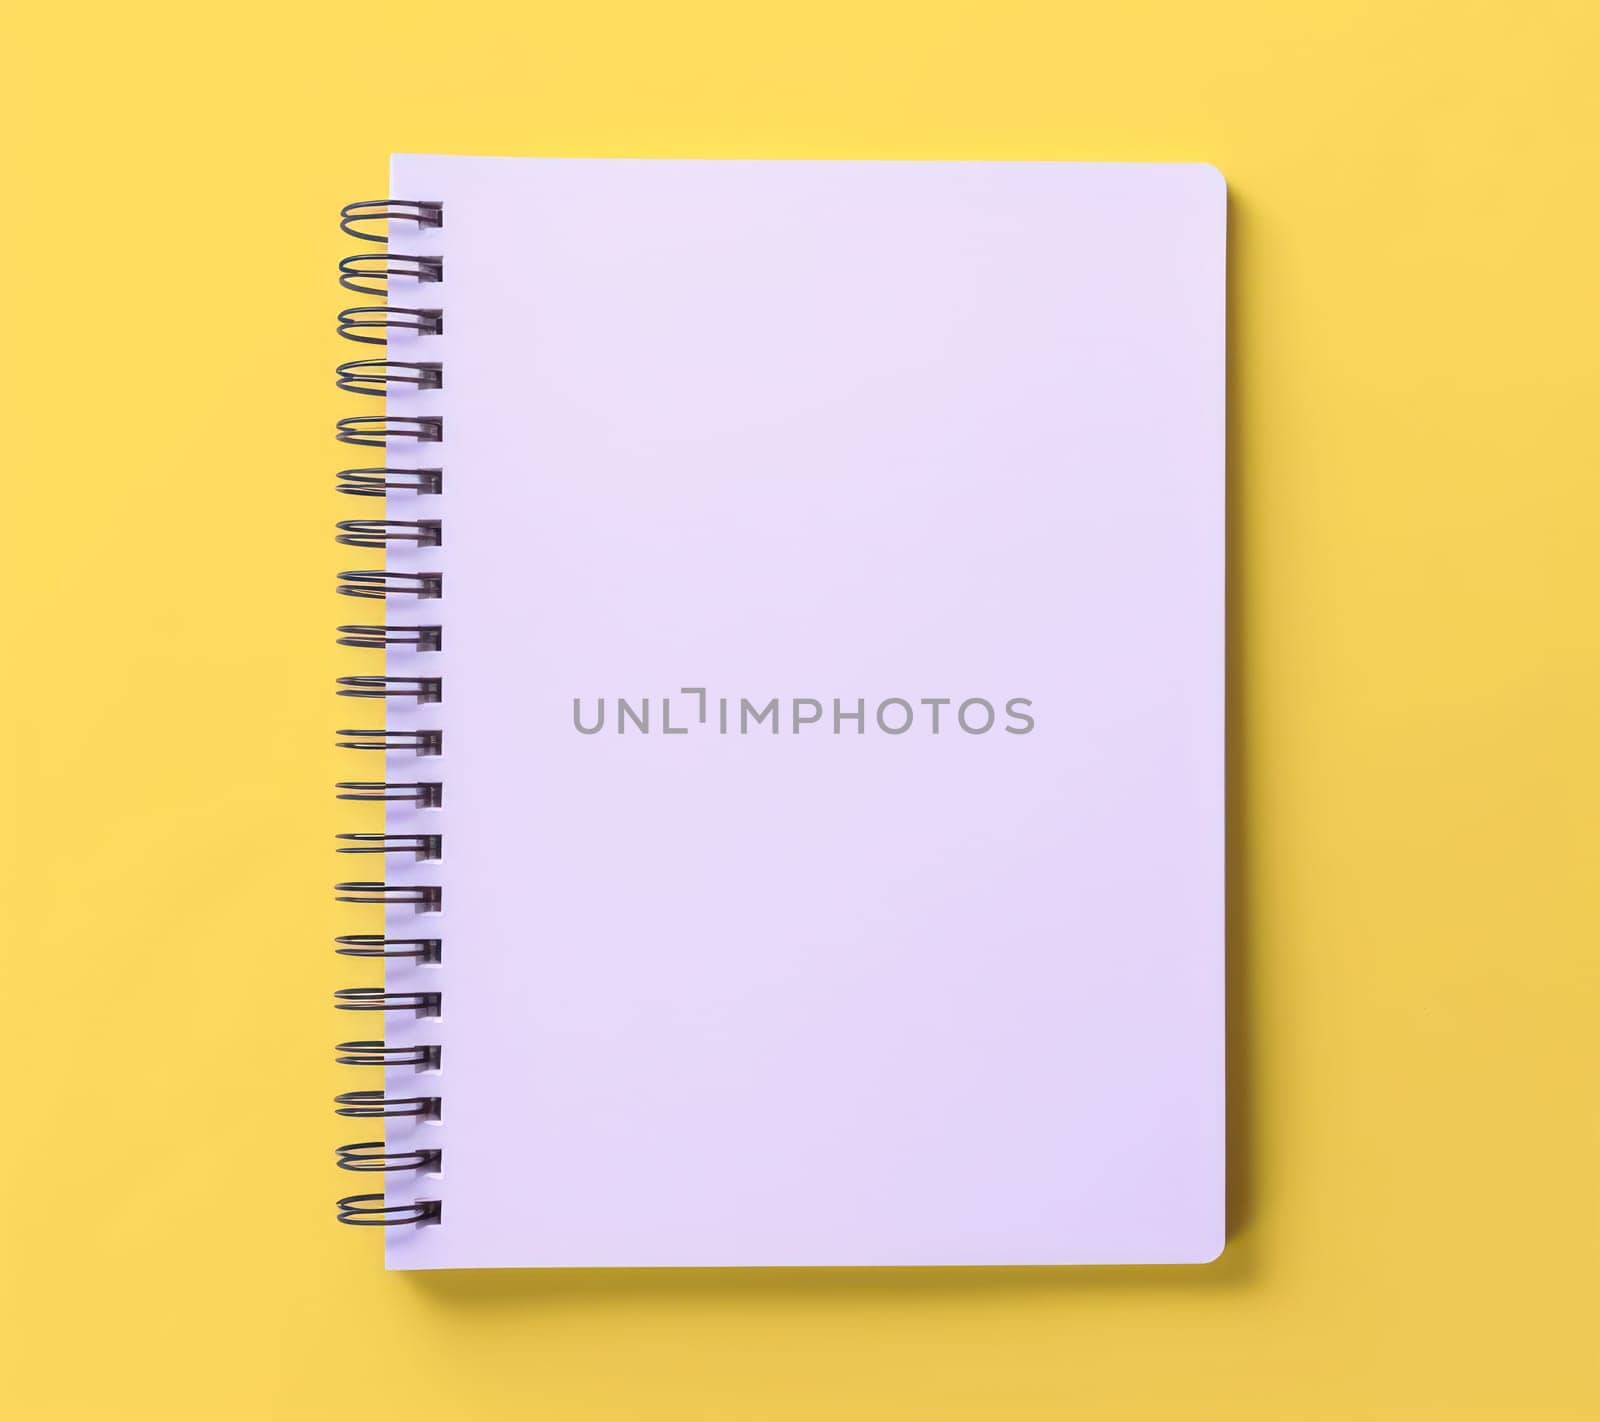 Blank Notepad on Blue Desk: Minimalistic Office Inspiration with White Spiral Notebook on Pastel Table Top by Vichizh